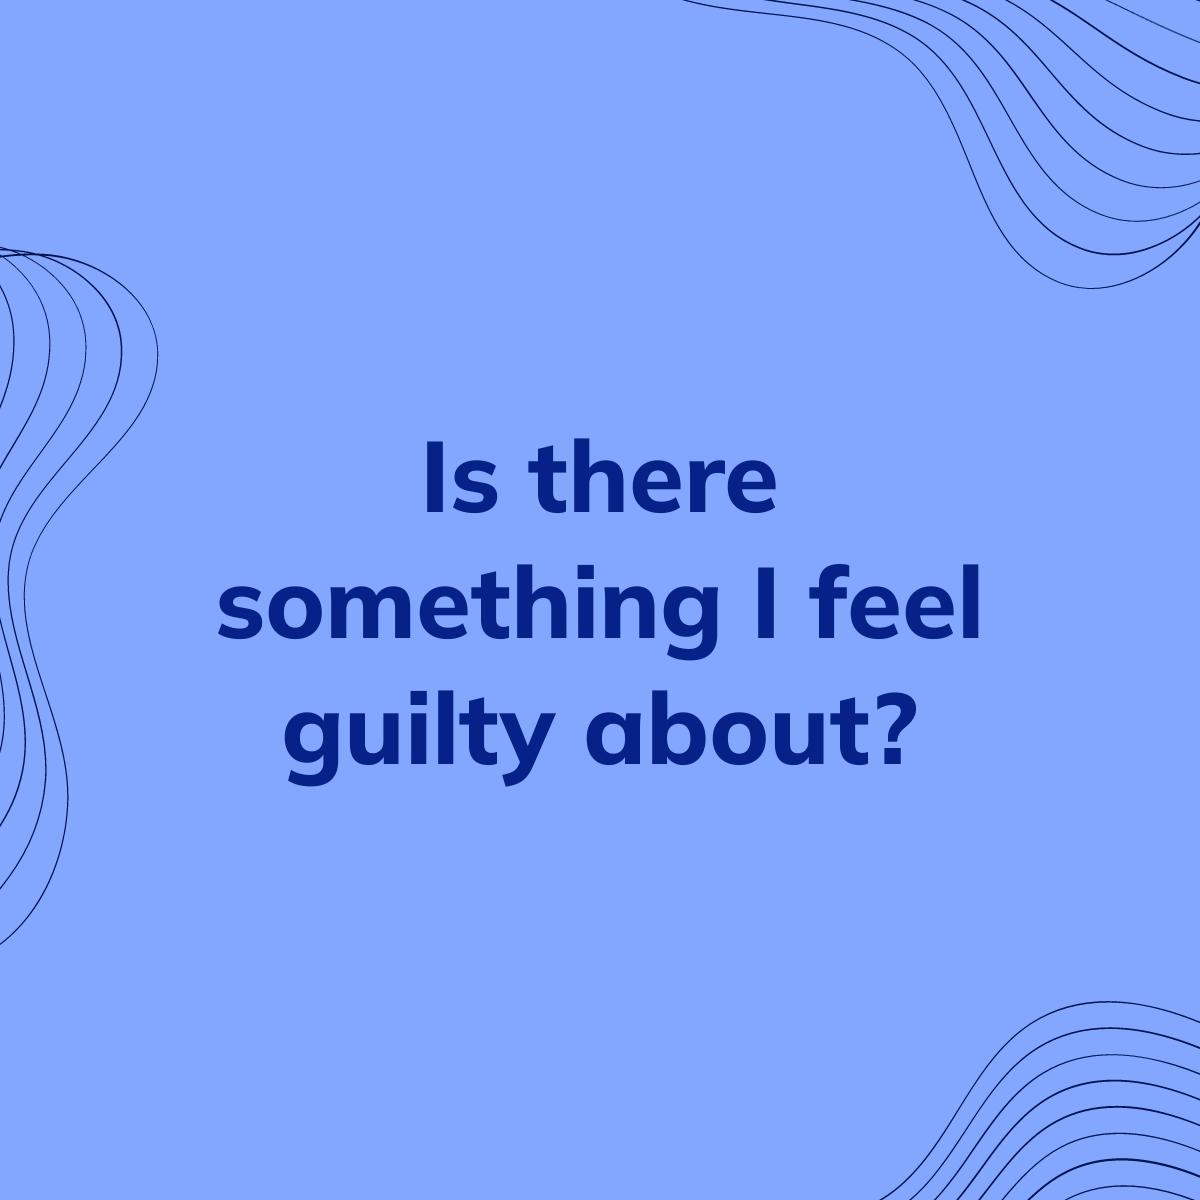 Journal Prompt: Is there something I feel guilty about?